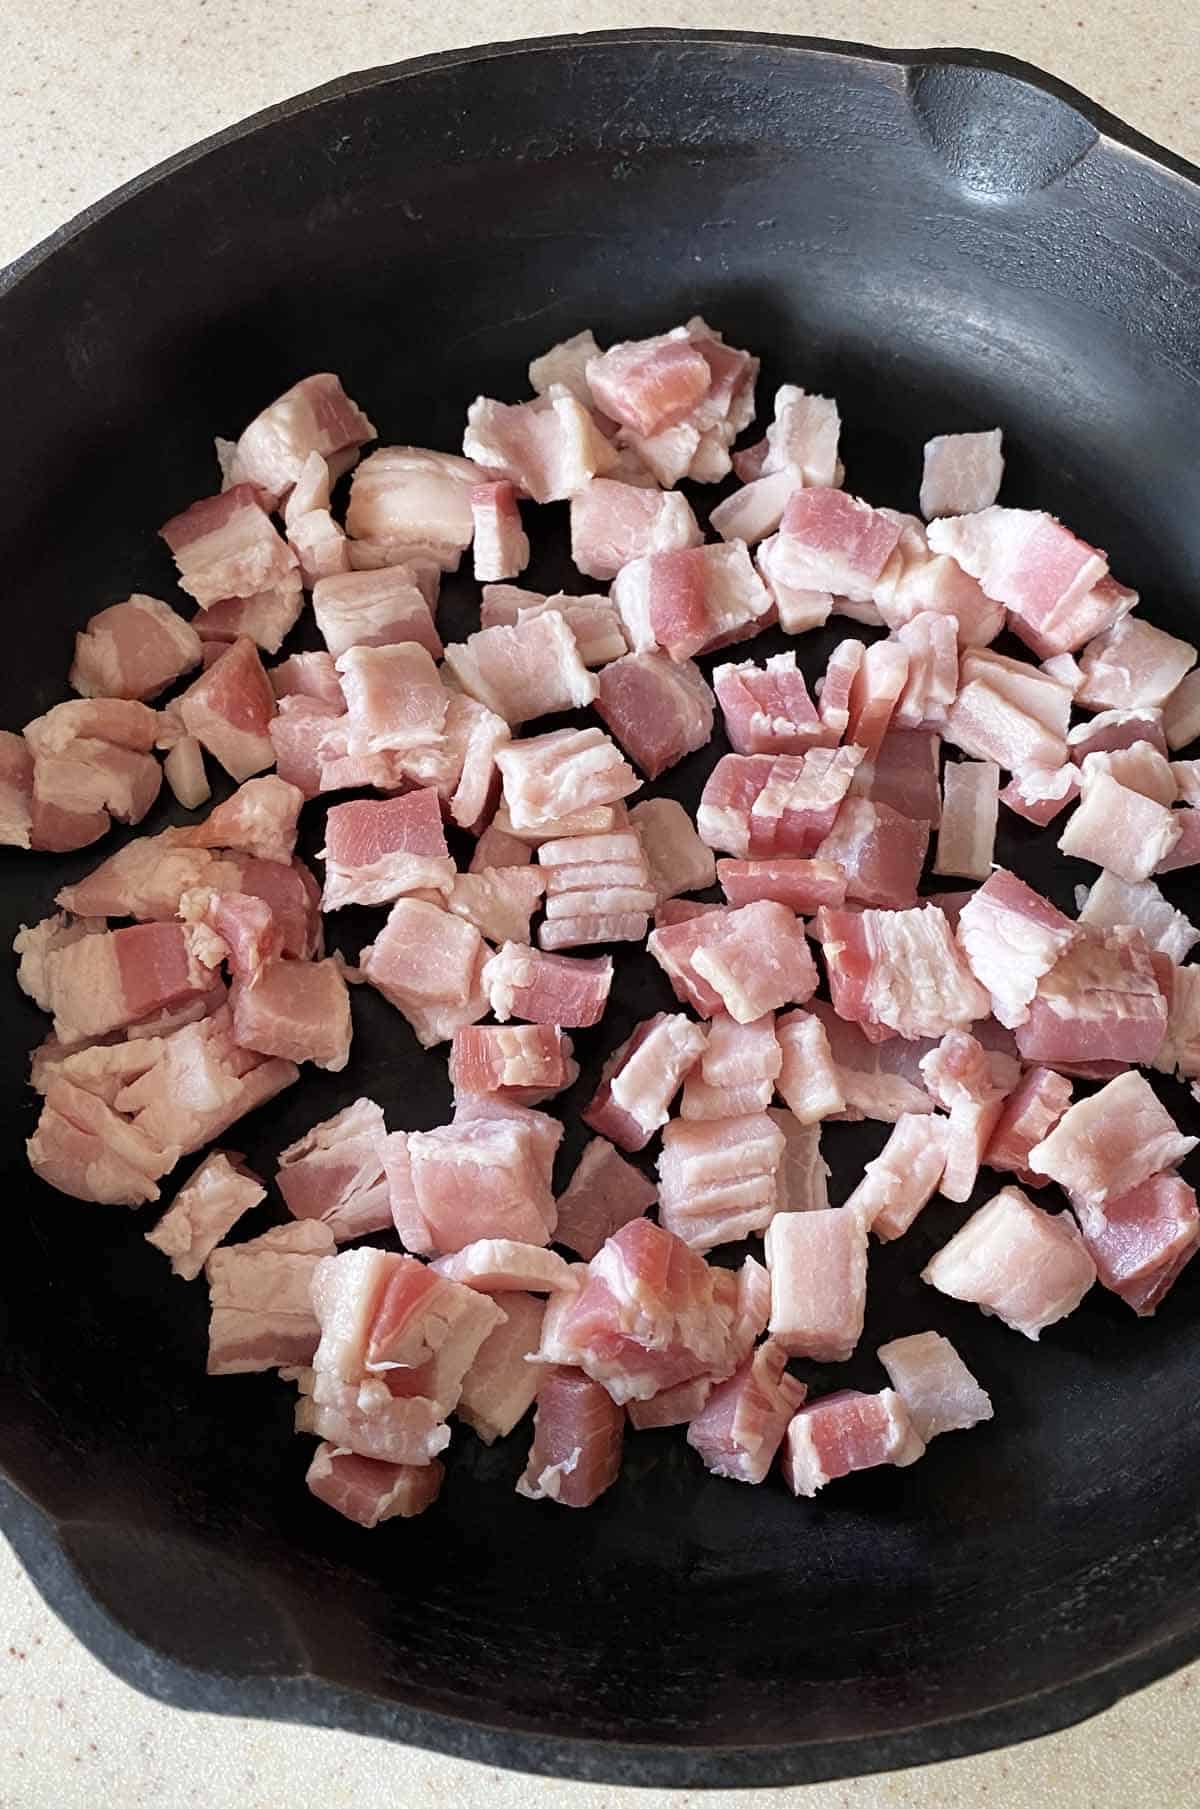 Close up image of 8 slices of chopped bacon in a black cast iron skillet